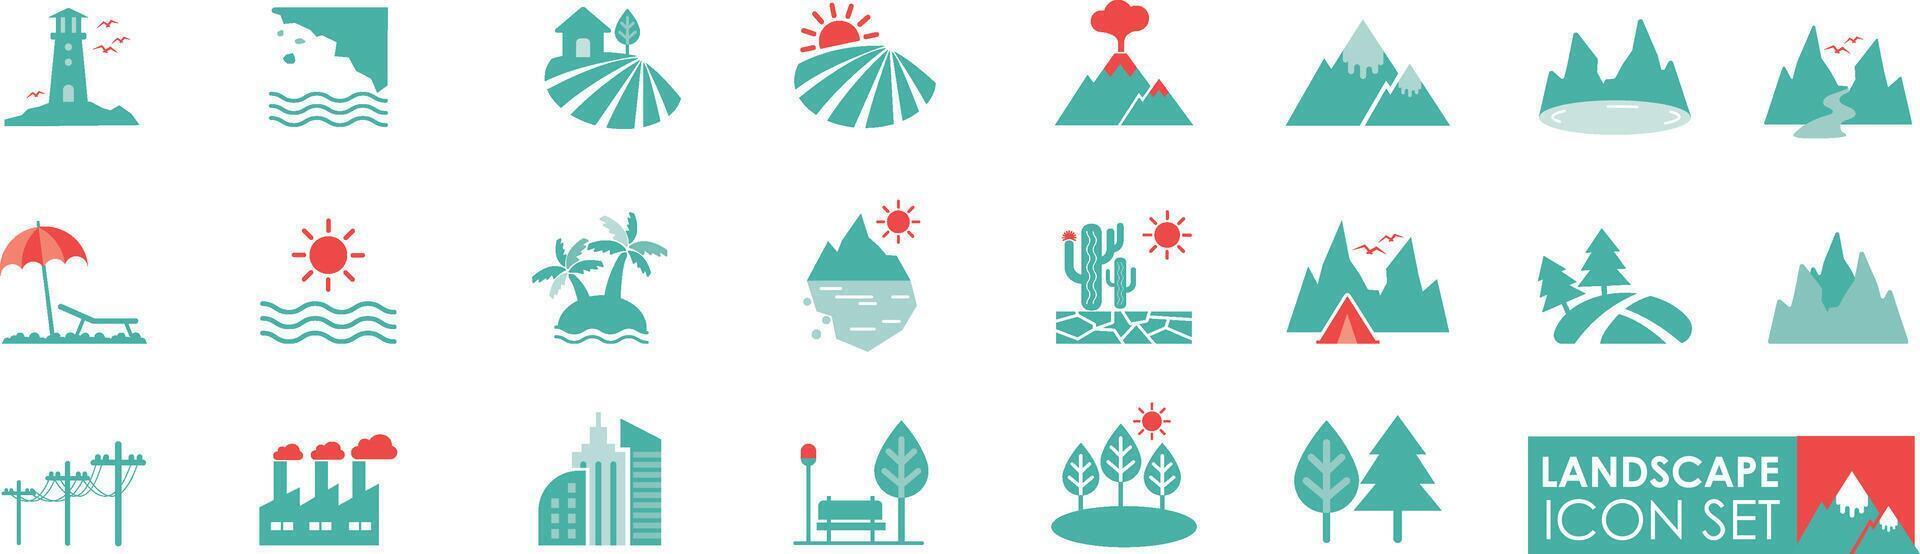 Landscape Icon set solid collection style, Containing mountain, city, building, forest, river, beach, desert, field, island, volcano vector